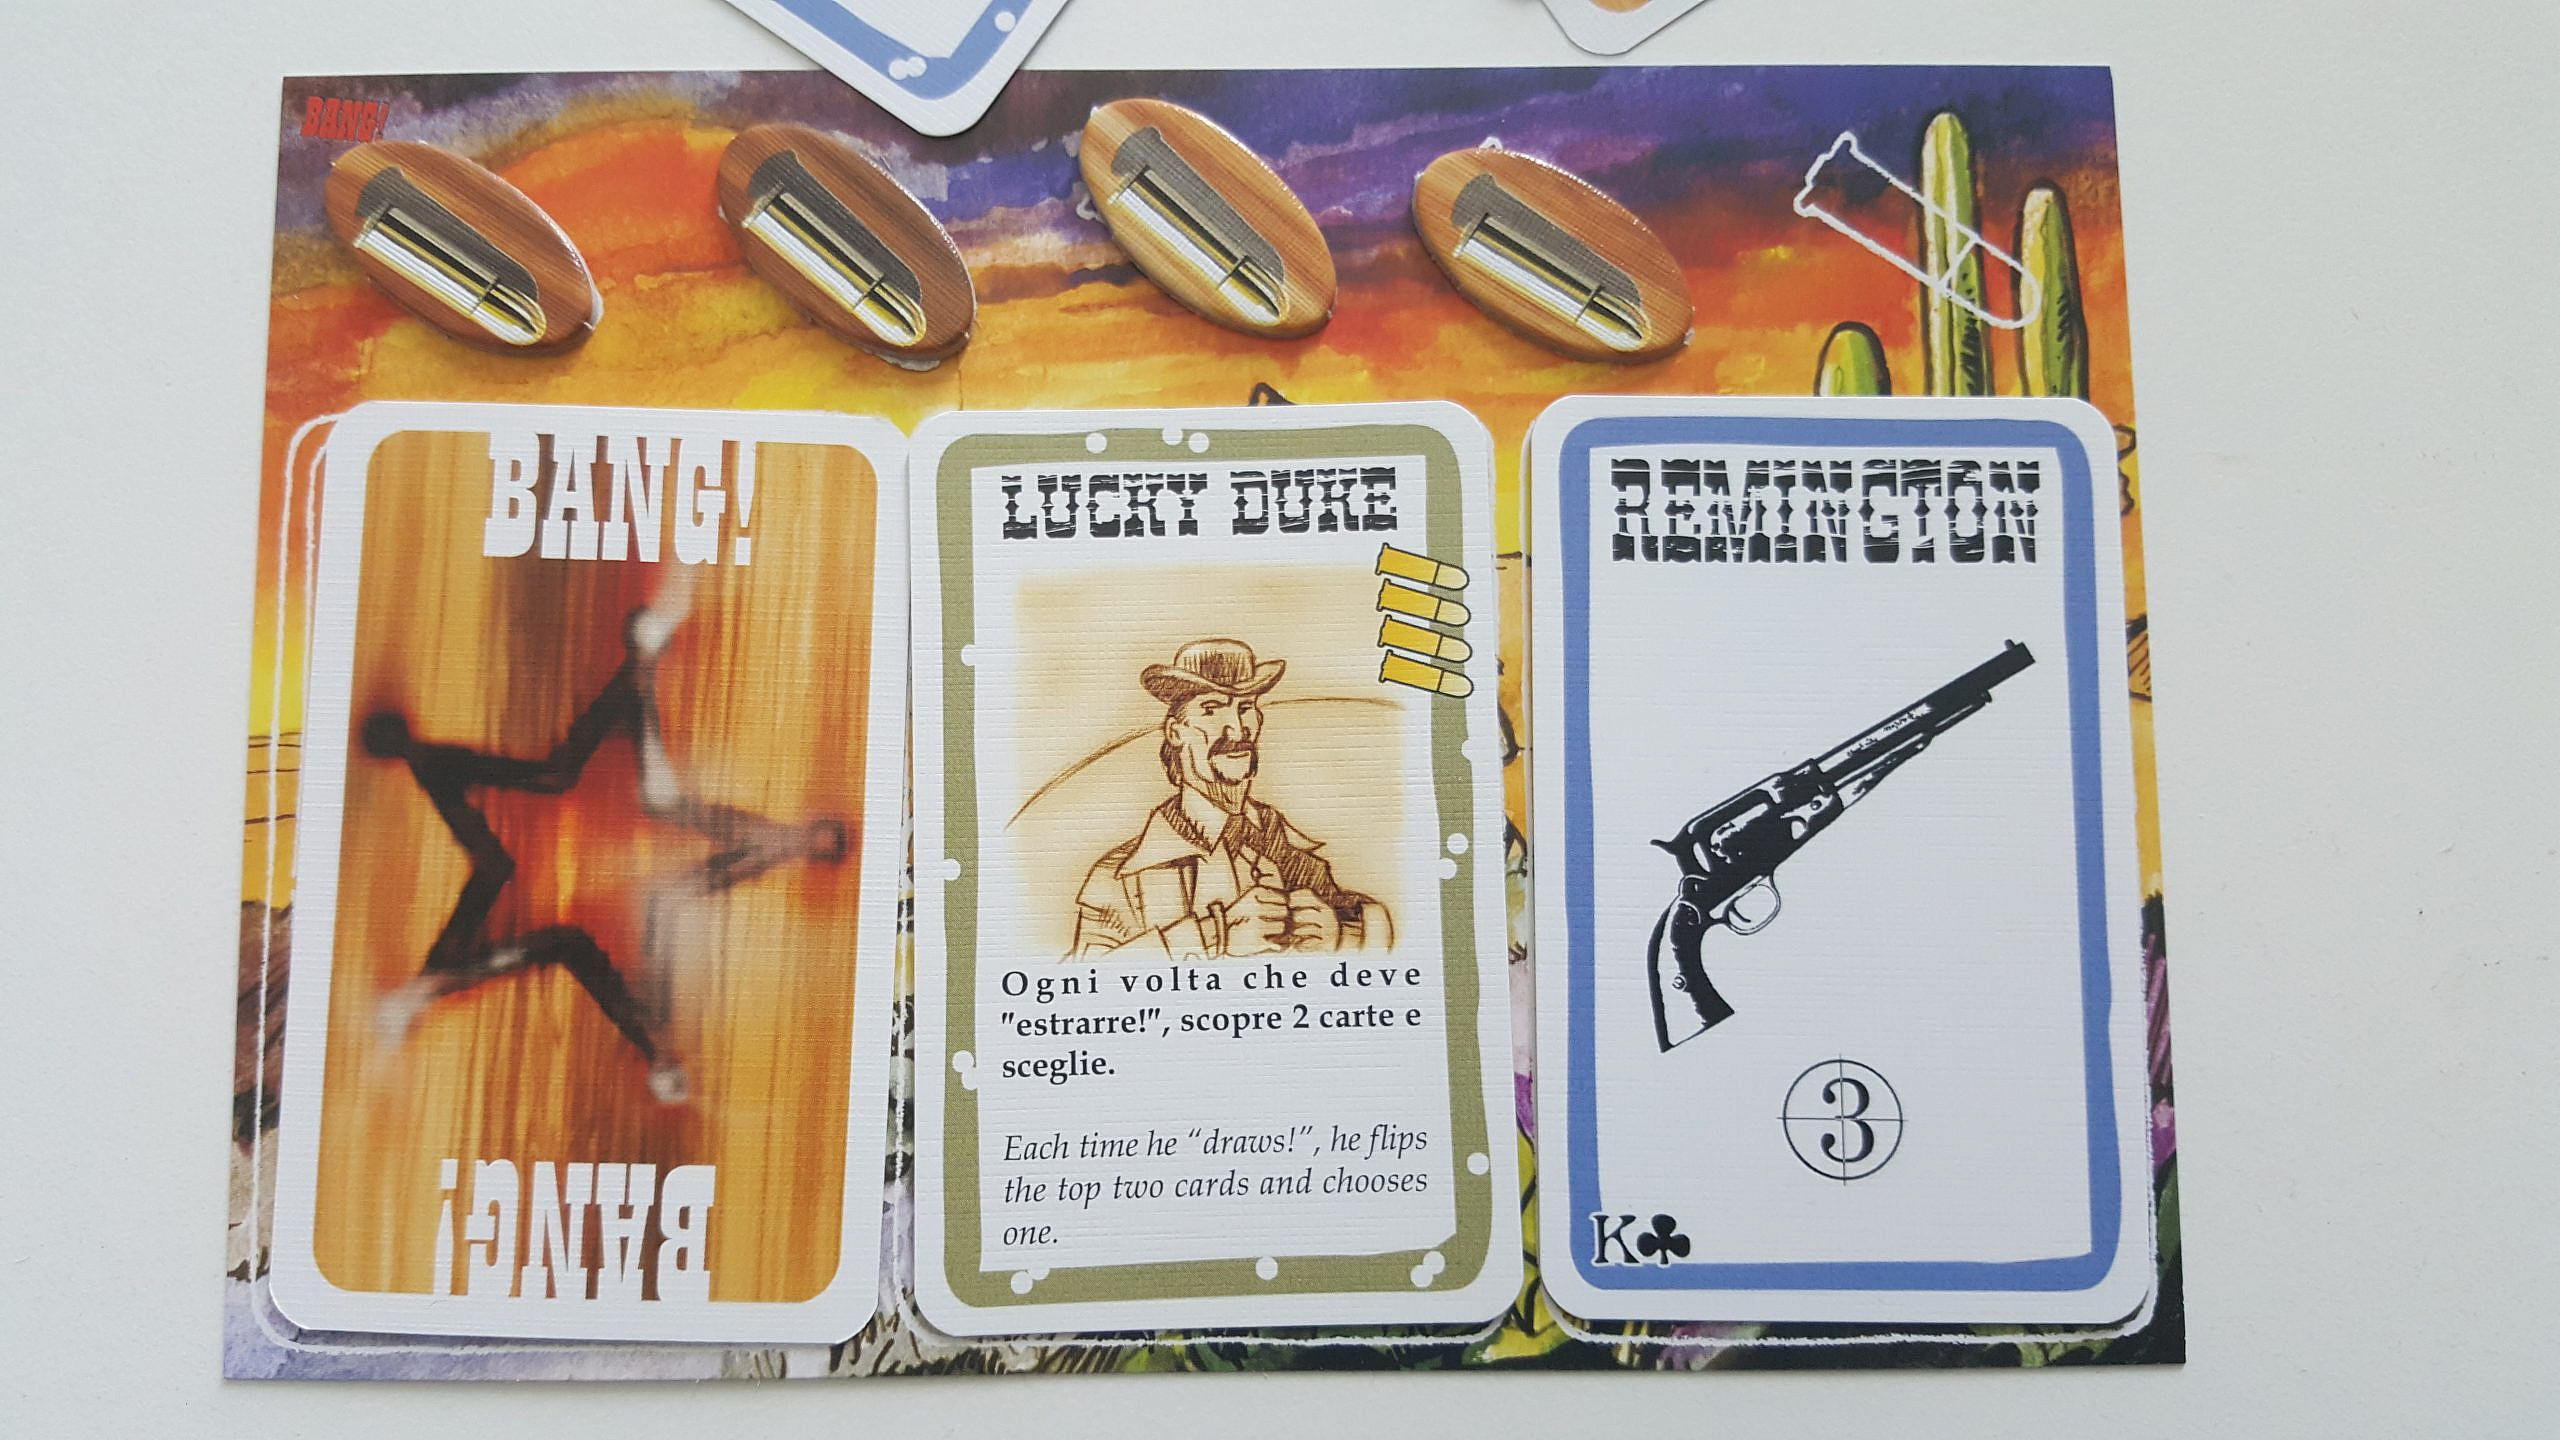 A player's role card, character card, weapon card and health (bullets)